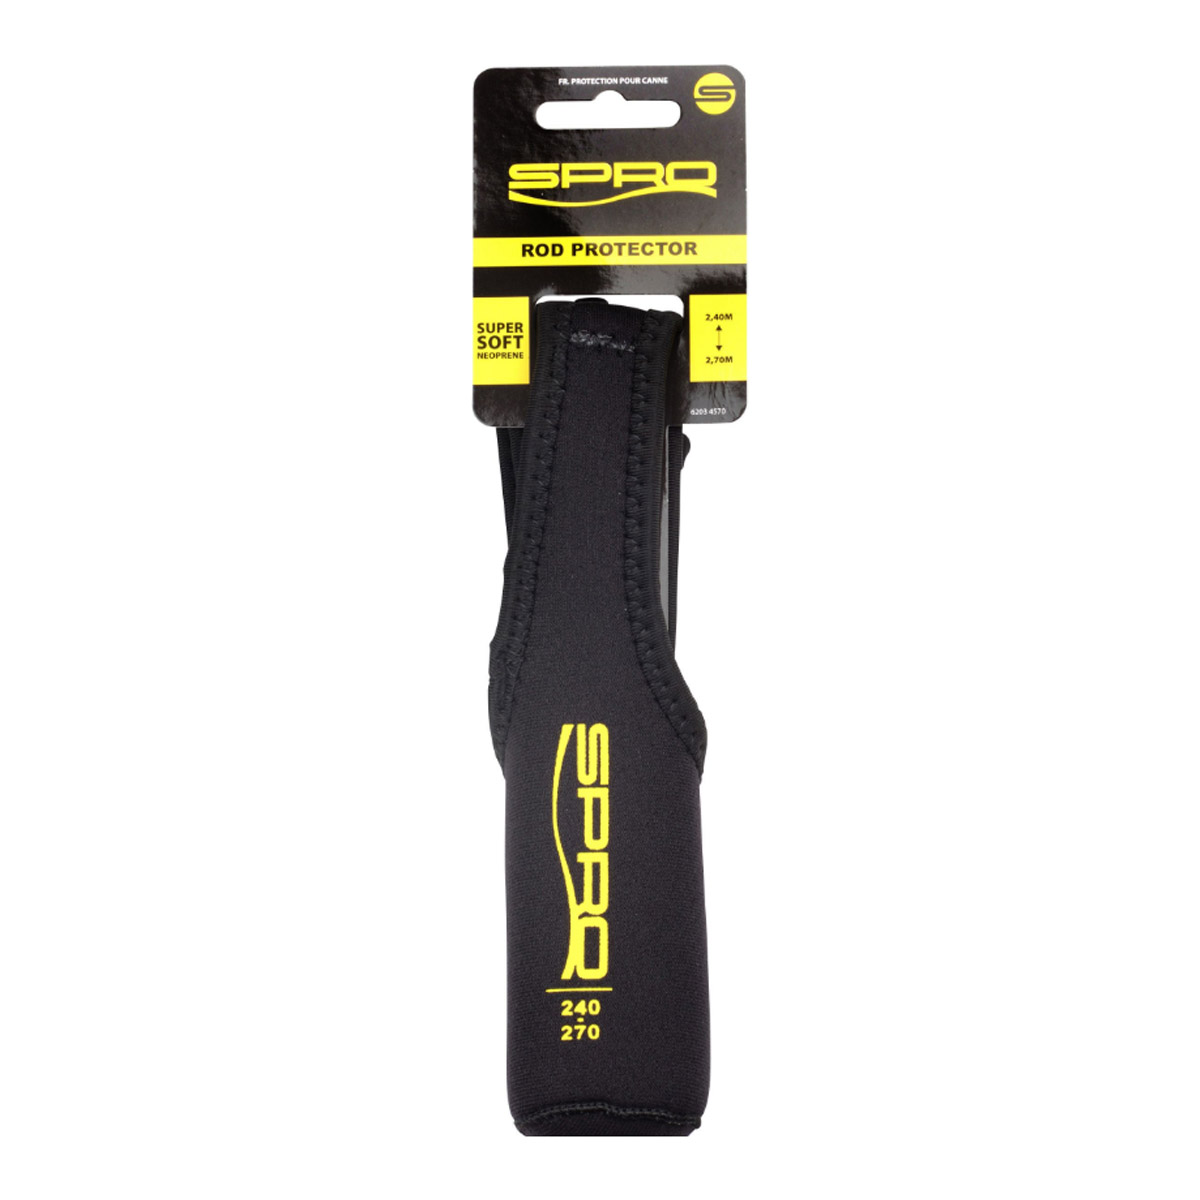 Spro rod protector 240 - 270